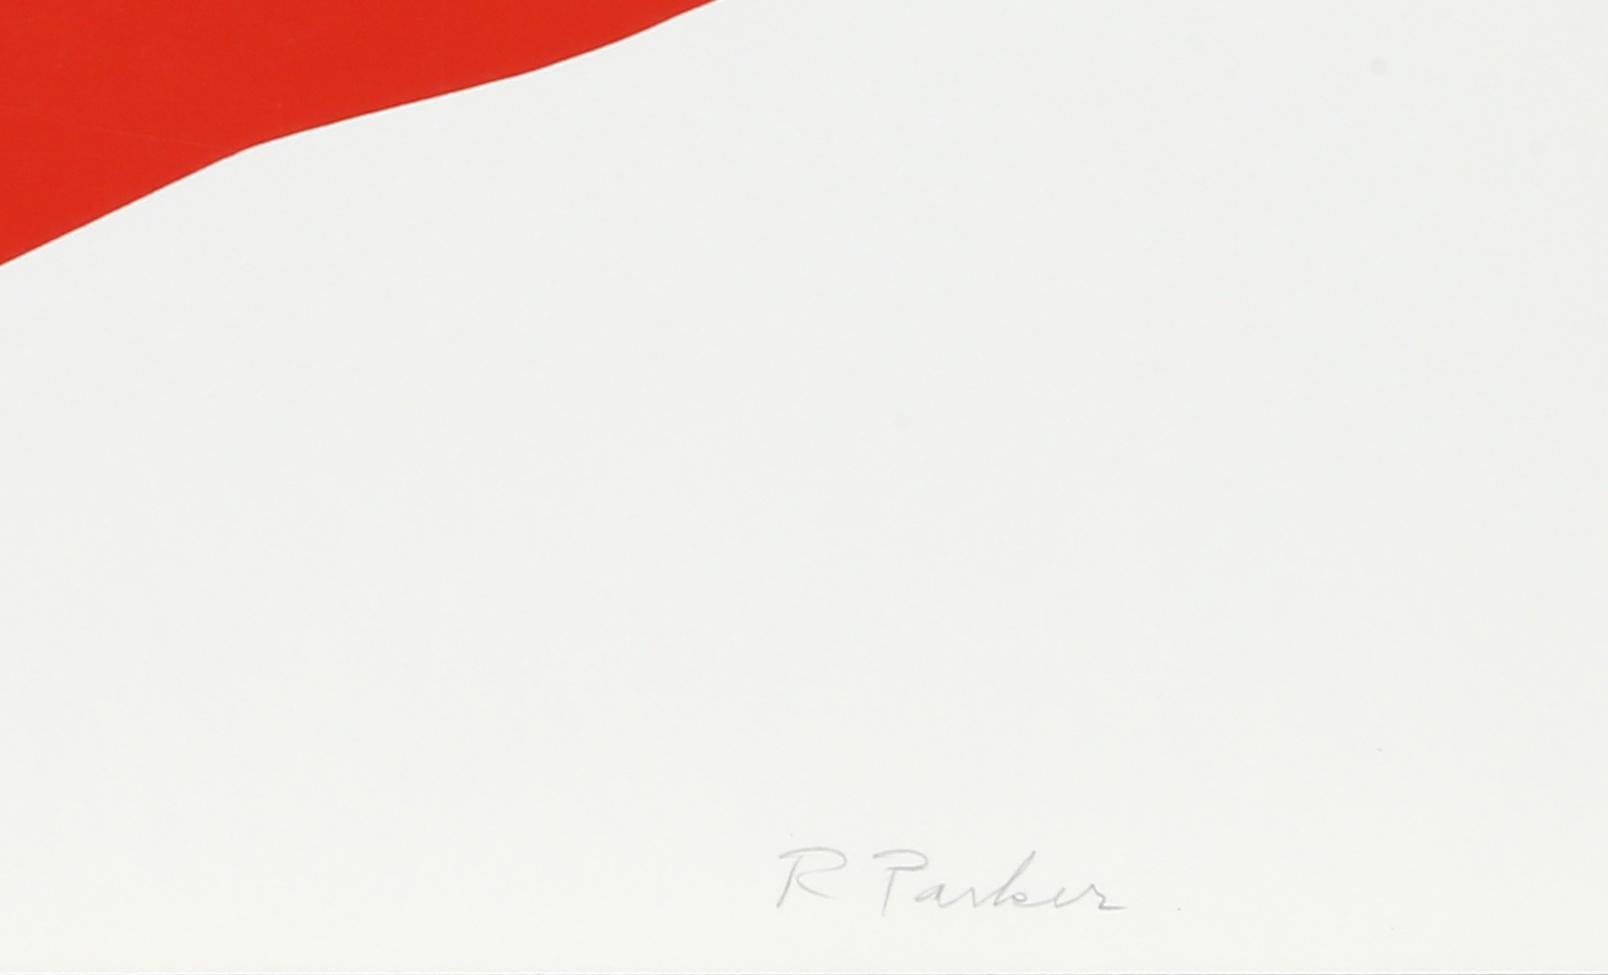 Artist: Raymond Parker, American (1922 - 1990)
Title: Untitled
Year: 1980
Medium: Silkscreen, signed and numbered in pencil
Edition: 70
Size: 23 x 30 inches